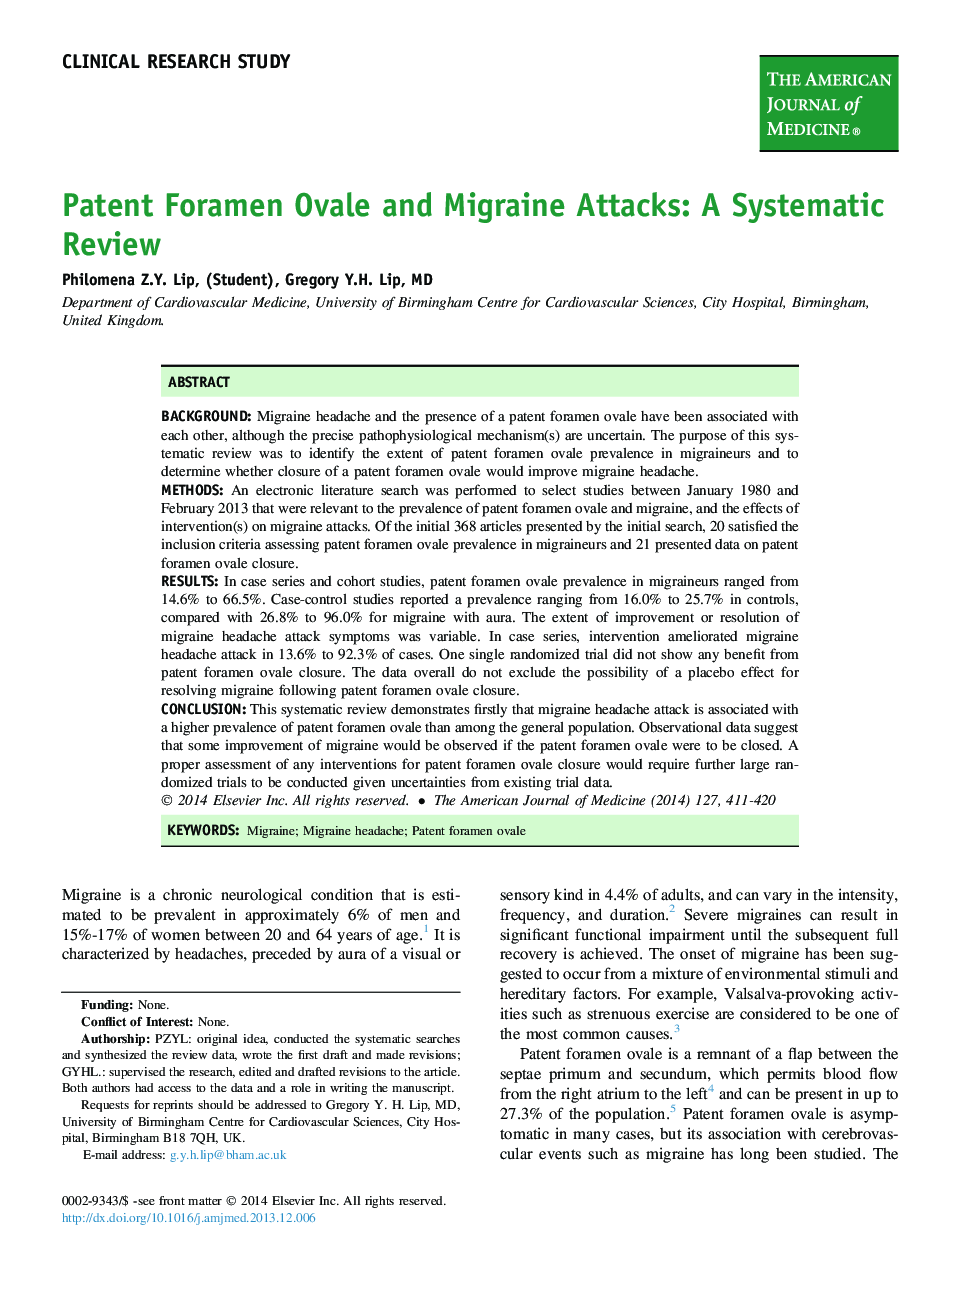 Clinical research studyPatent Foramen Ovale and Migraine Attacks: A Systematic Review